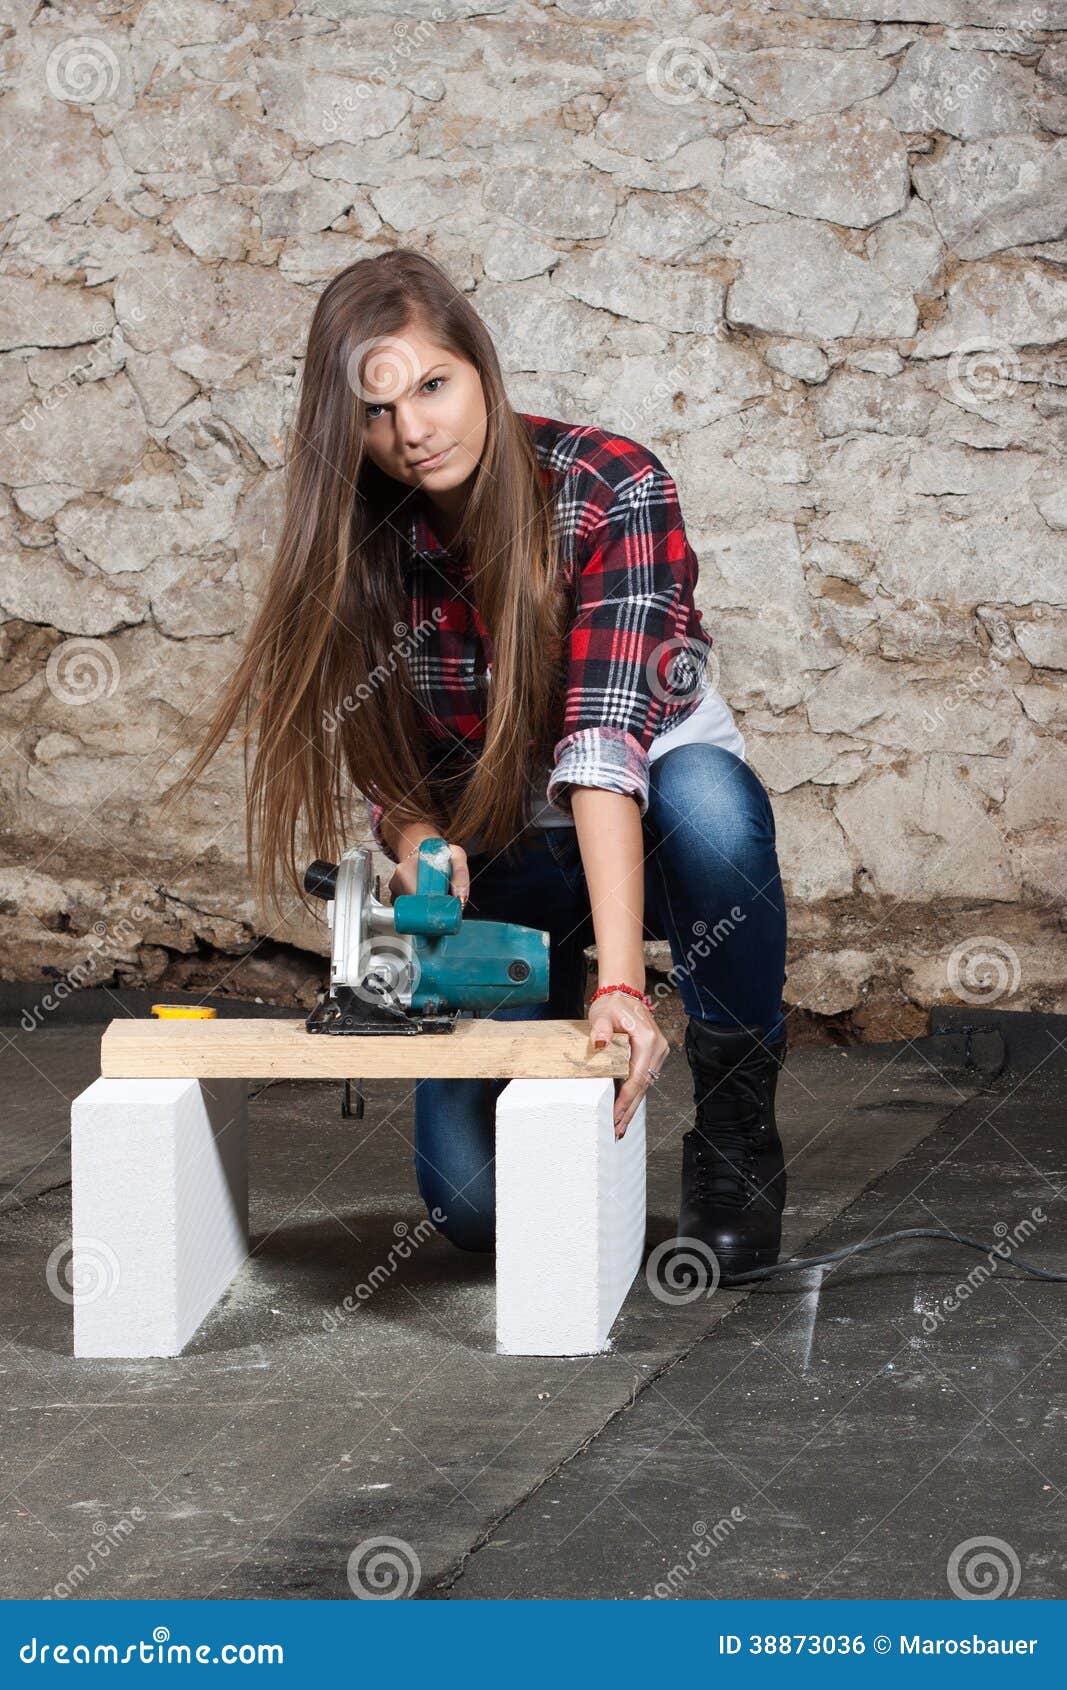 Young Long-haired Woman With A Circular Saw Stock Photo - Image: 38873036